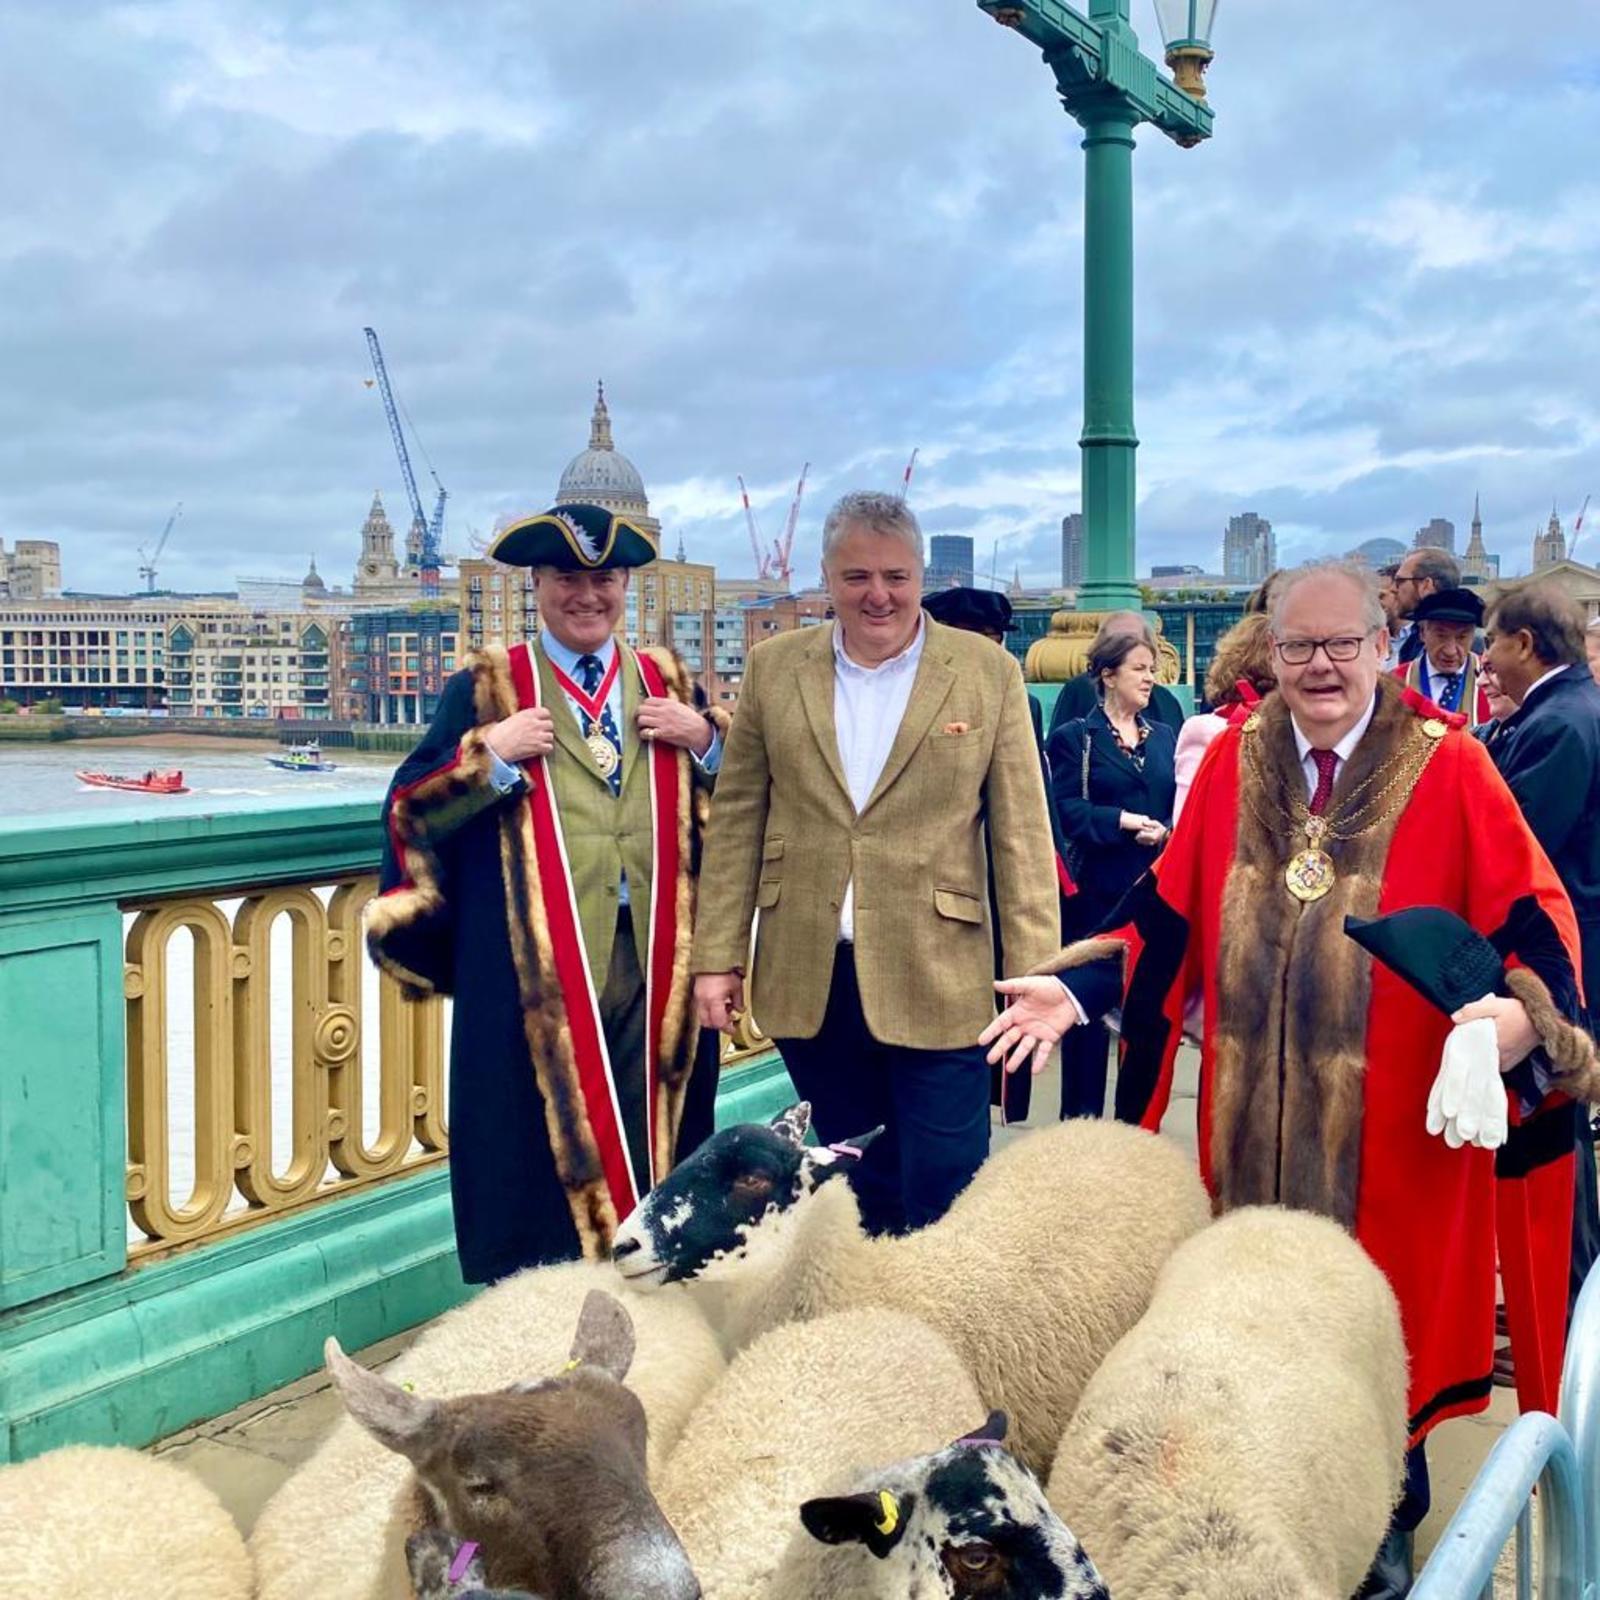 24 September 2023 - Exercising my ancient right to herd sheep over London’s Bridges without paying taxes